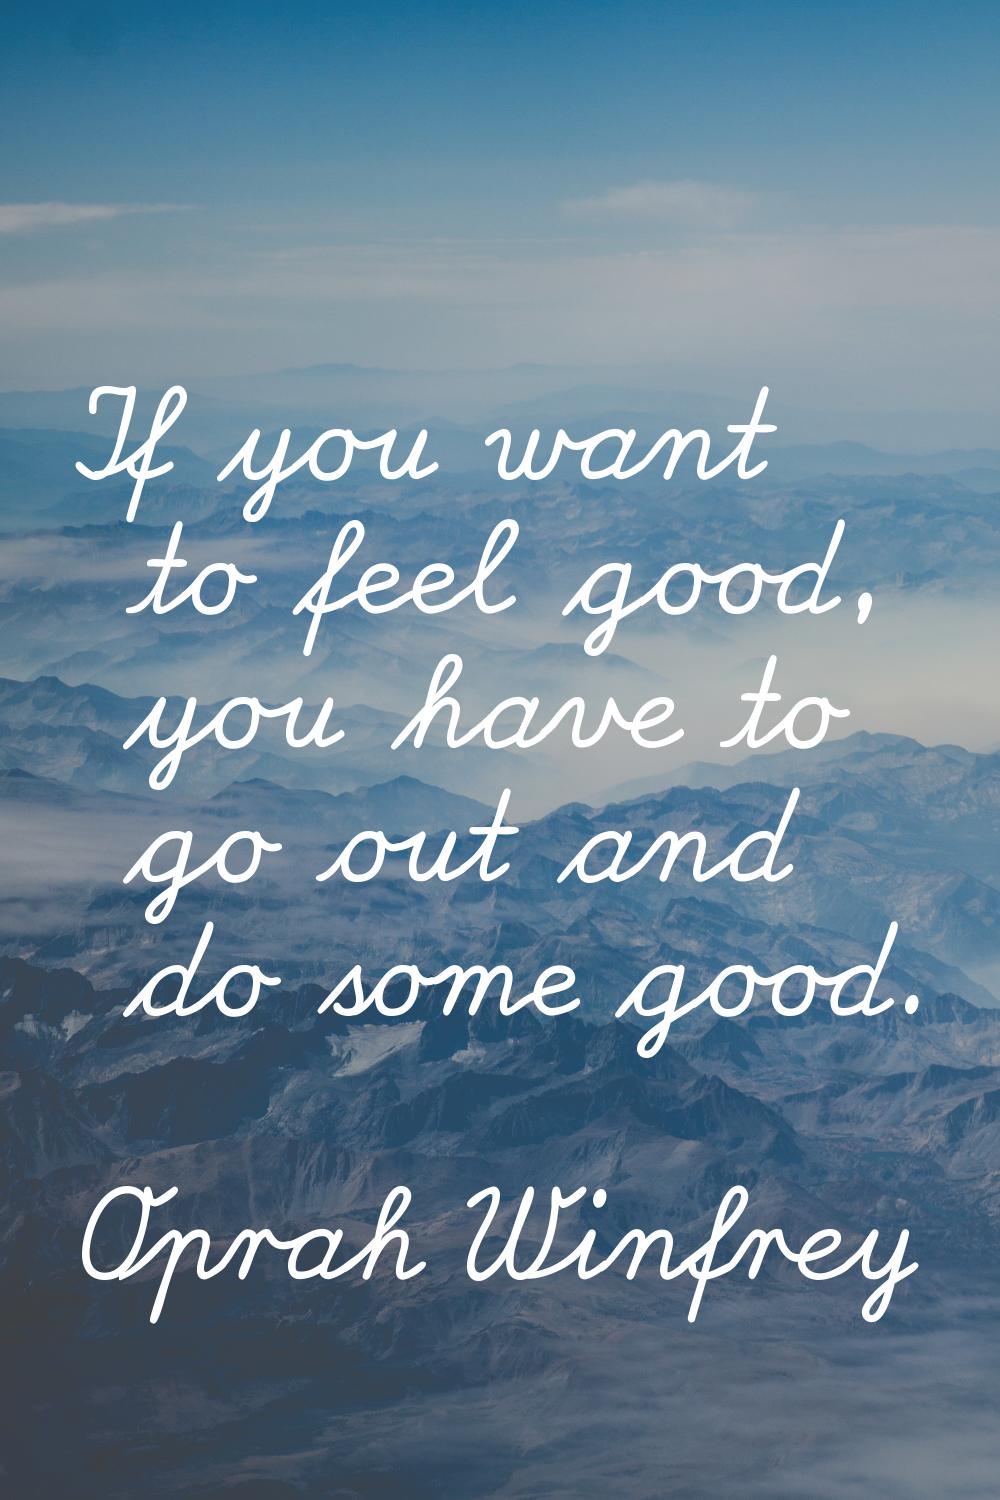 If you want to feel good, you have to go out and do some good.